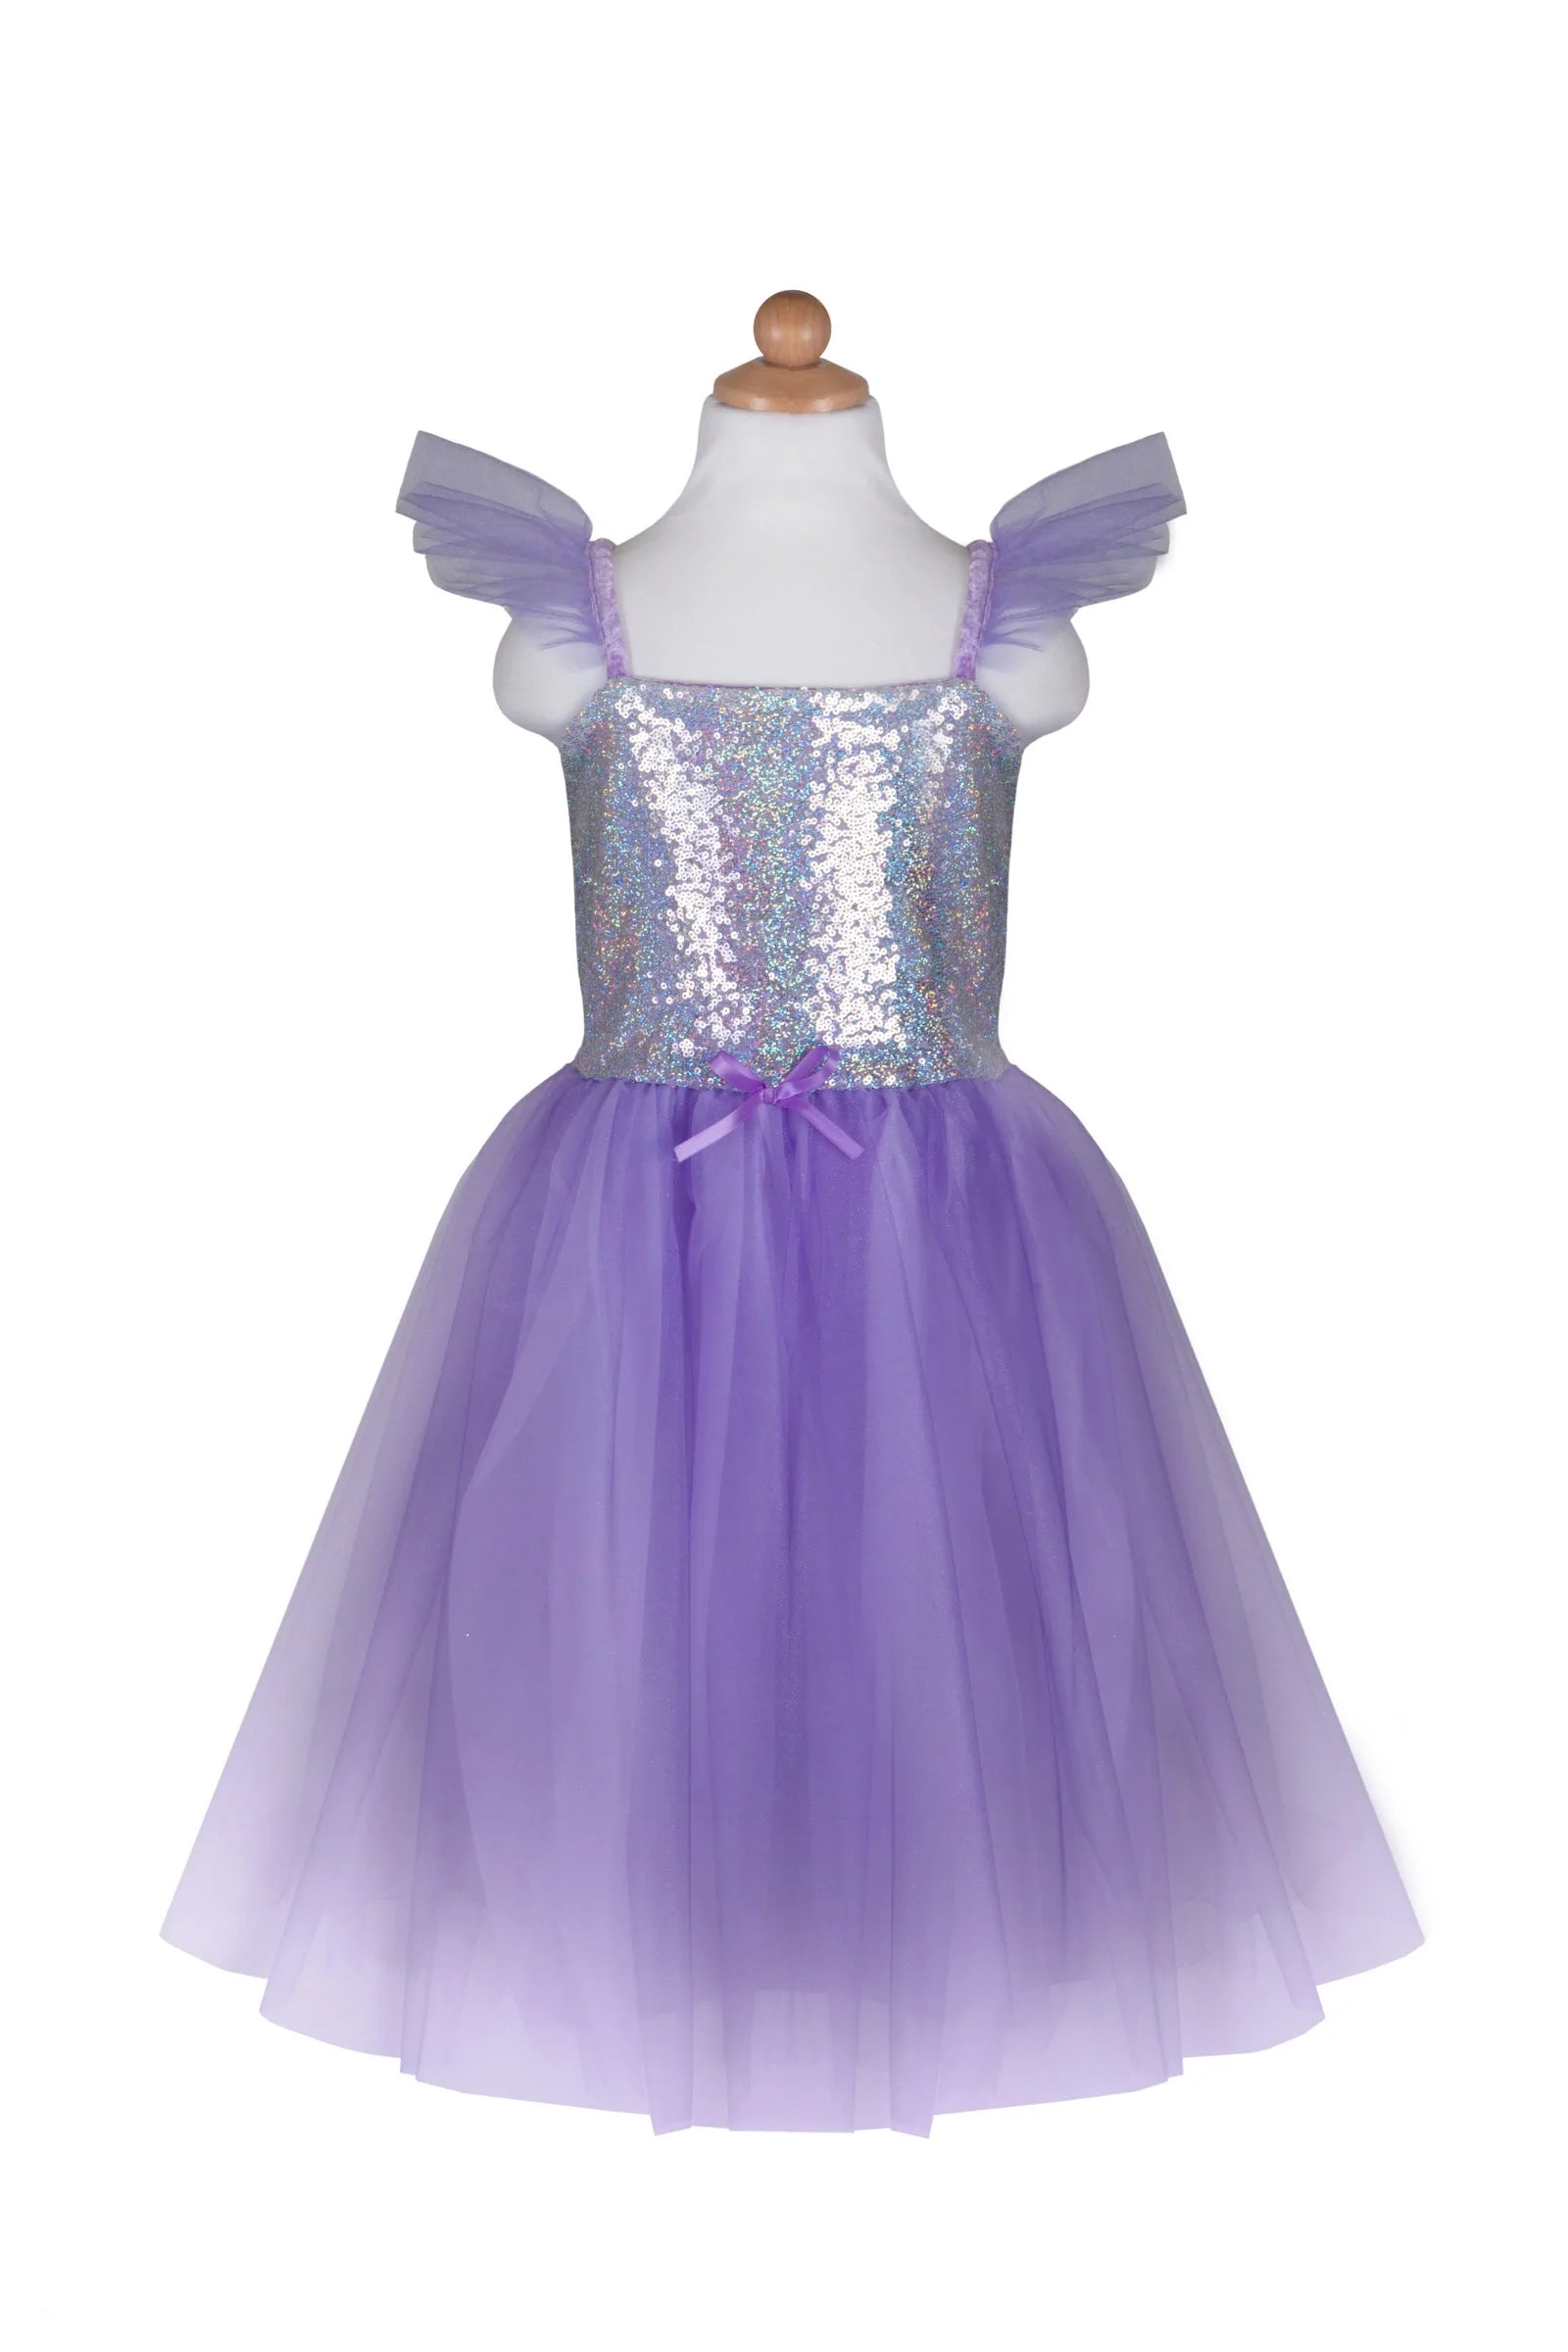 Sequins Princess Dress Lilac- Size 3/4 by Great Pretenders #32333